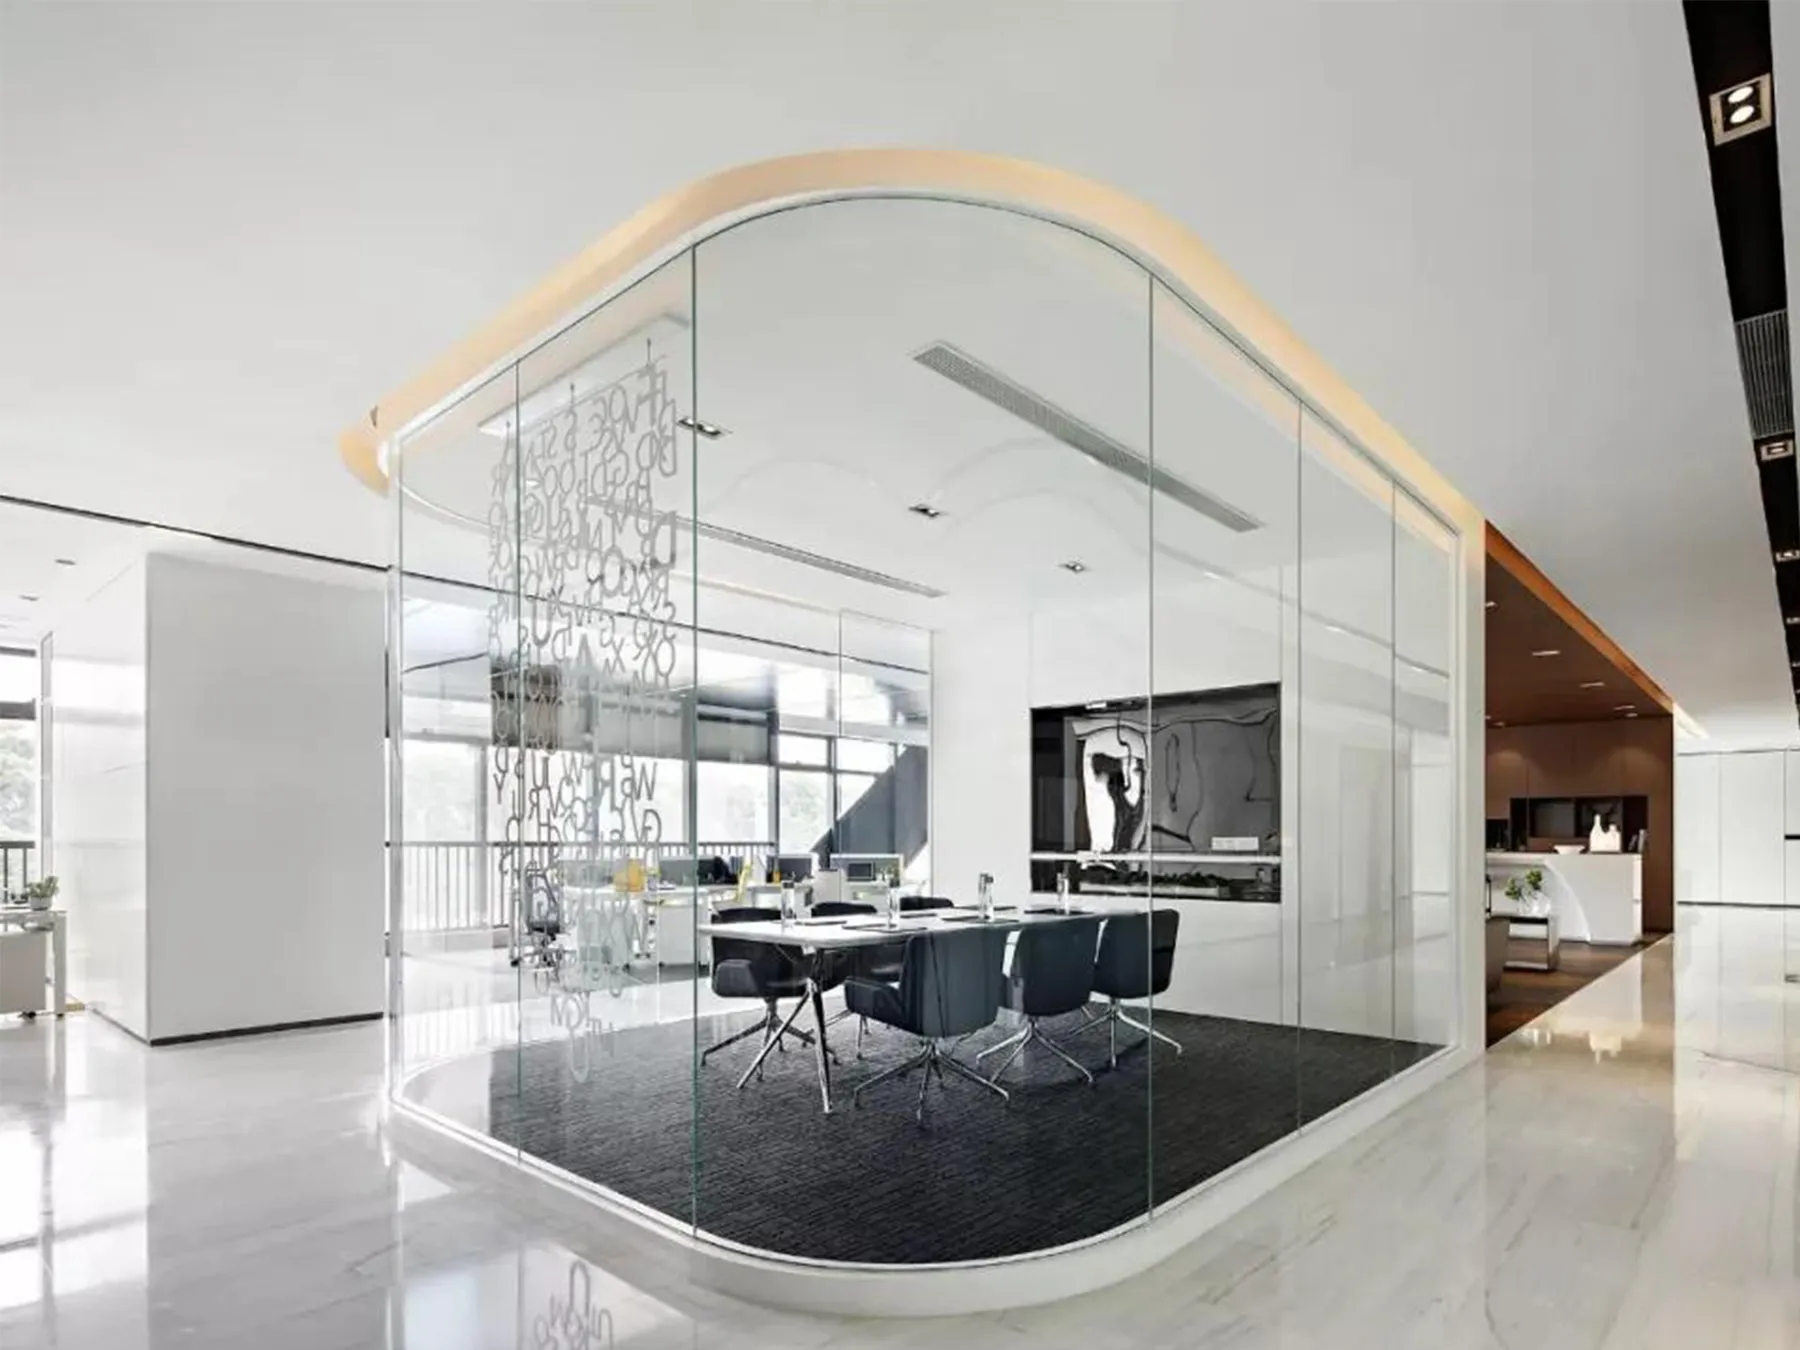 Meeting space with curved glass partitions